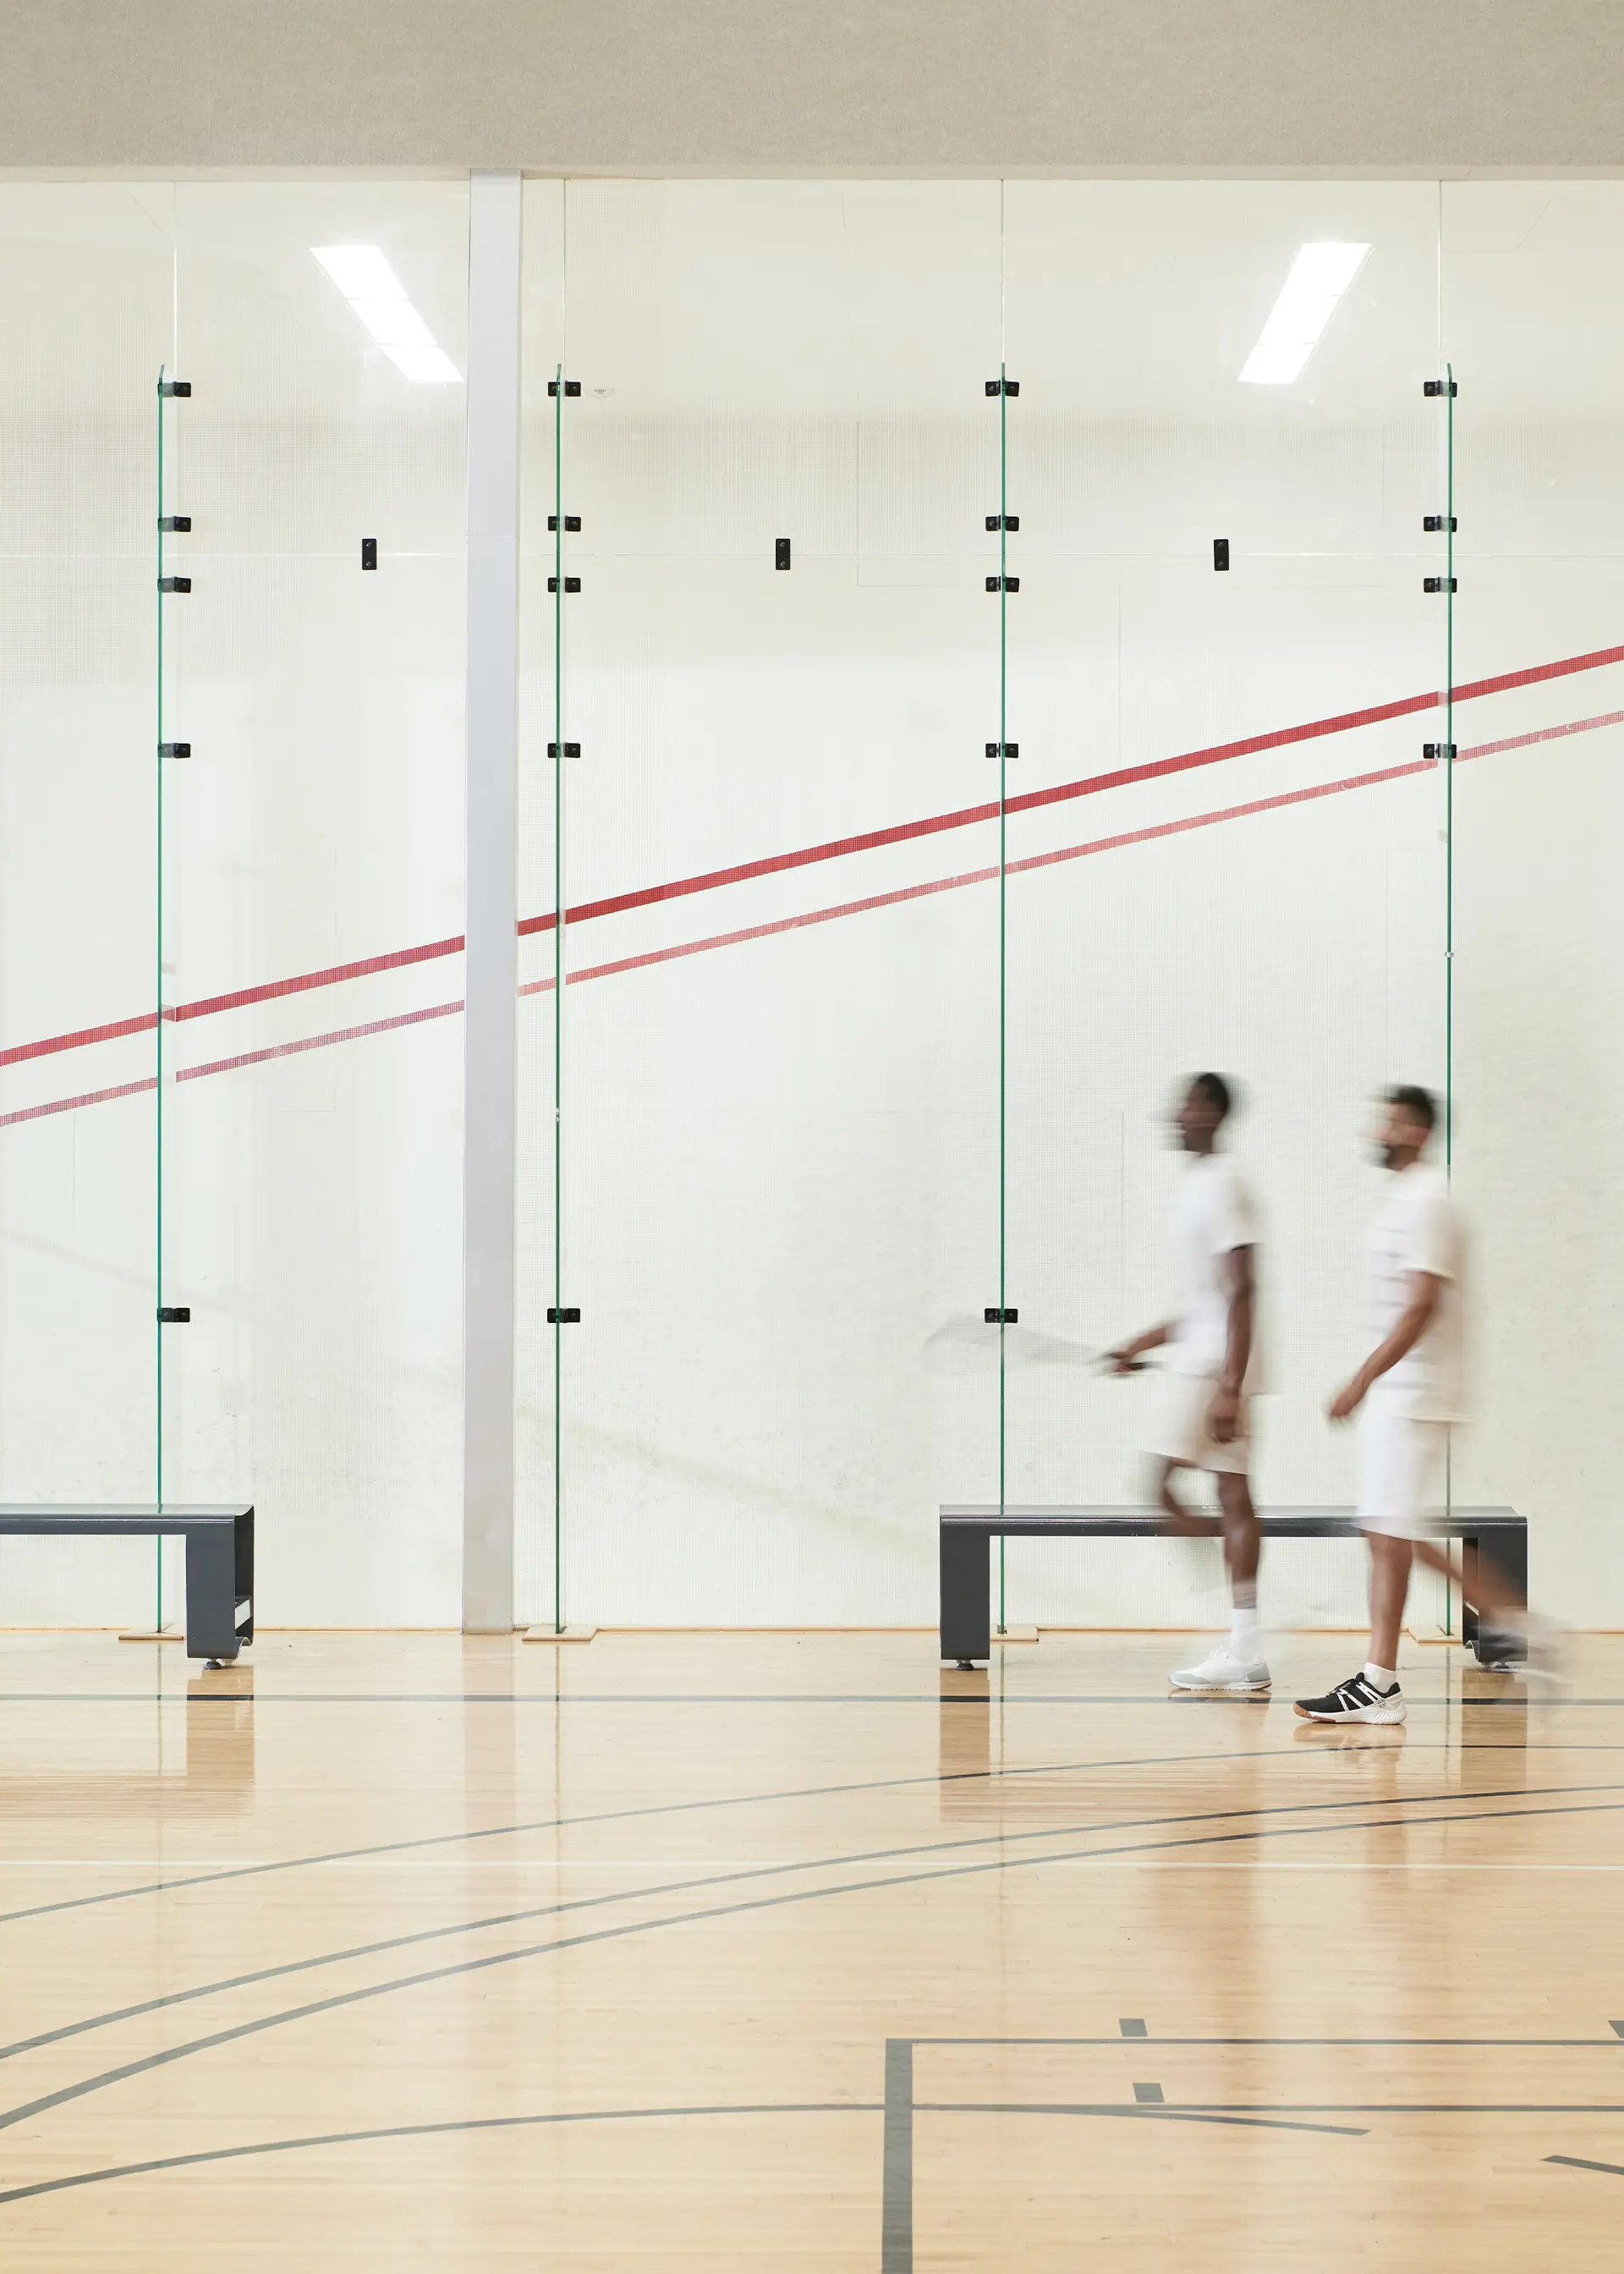 Two blurred or stylized people walking on an indoor court.